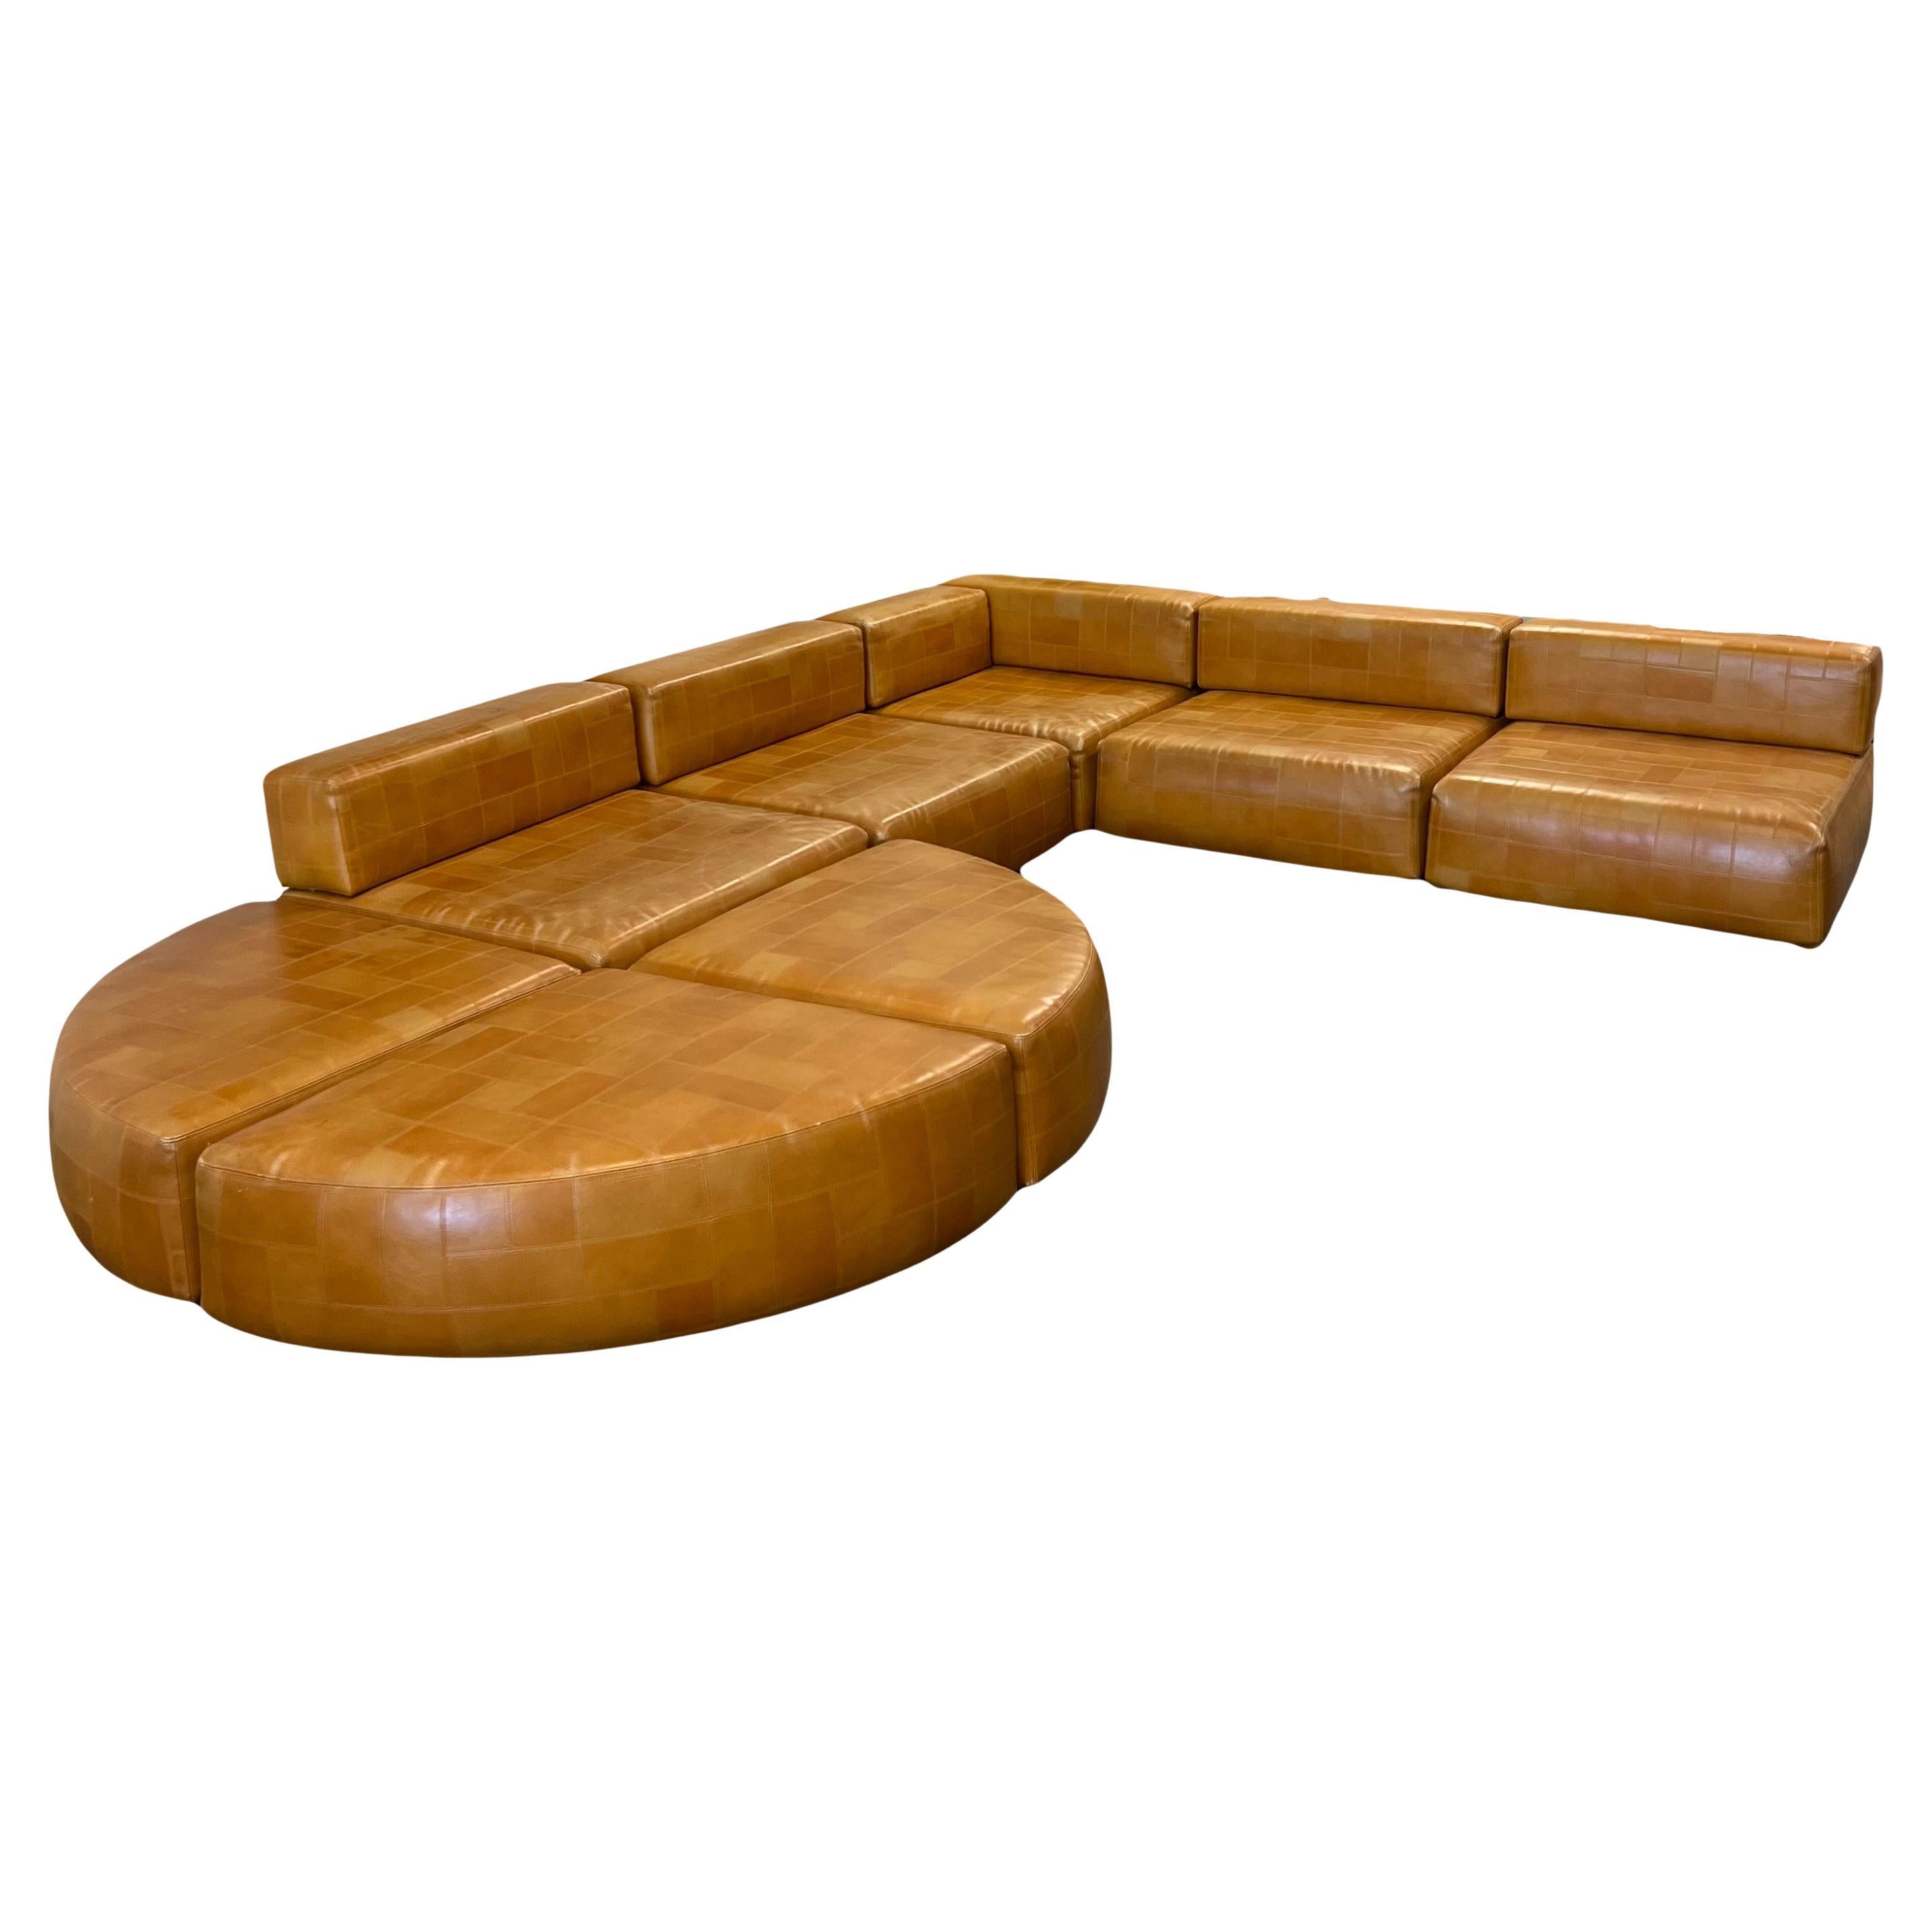 What is the best leather sectional?